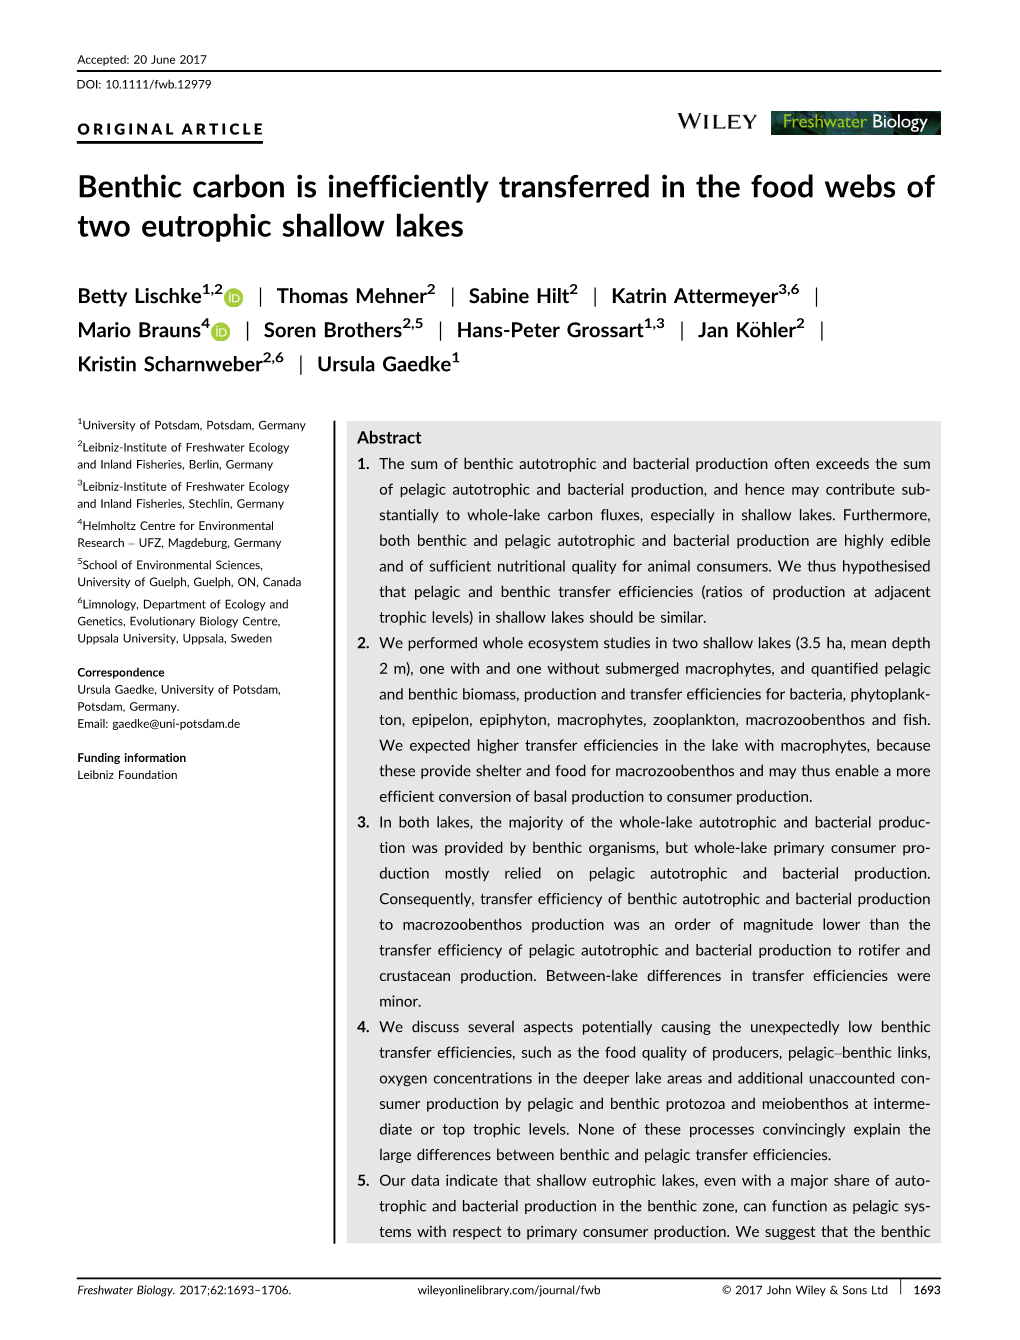 Benthic Carbon Is Inefficiently Transferred in the Food Webs of Two Eutrophic Shallow Lakes